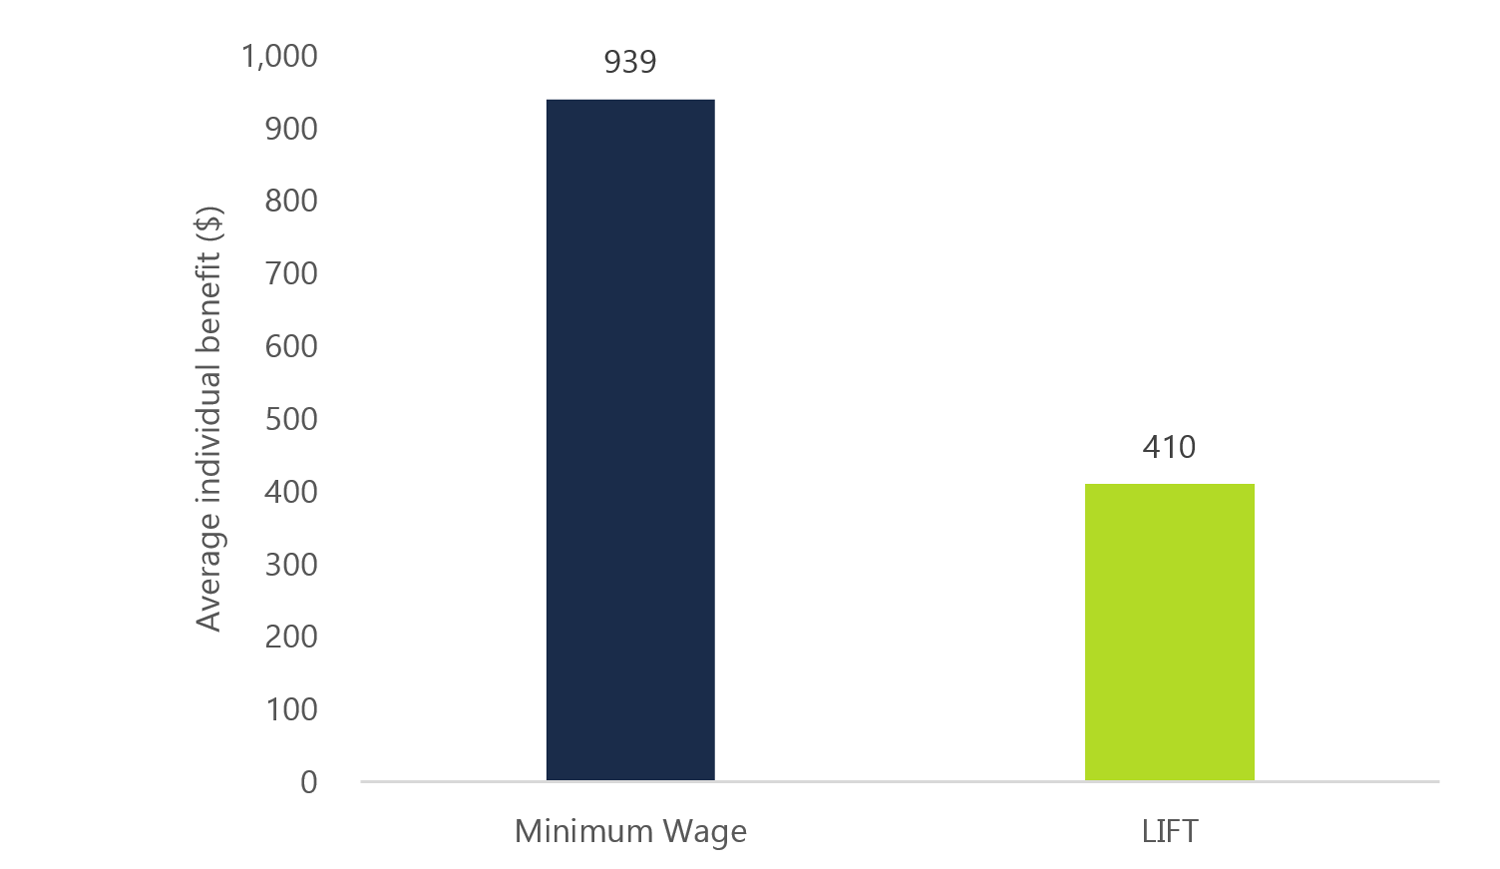 Minimum wage earners that receive the LIFT credit would have been better off with an increase in the minimum wage to $15 per hour